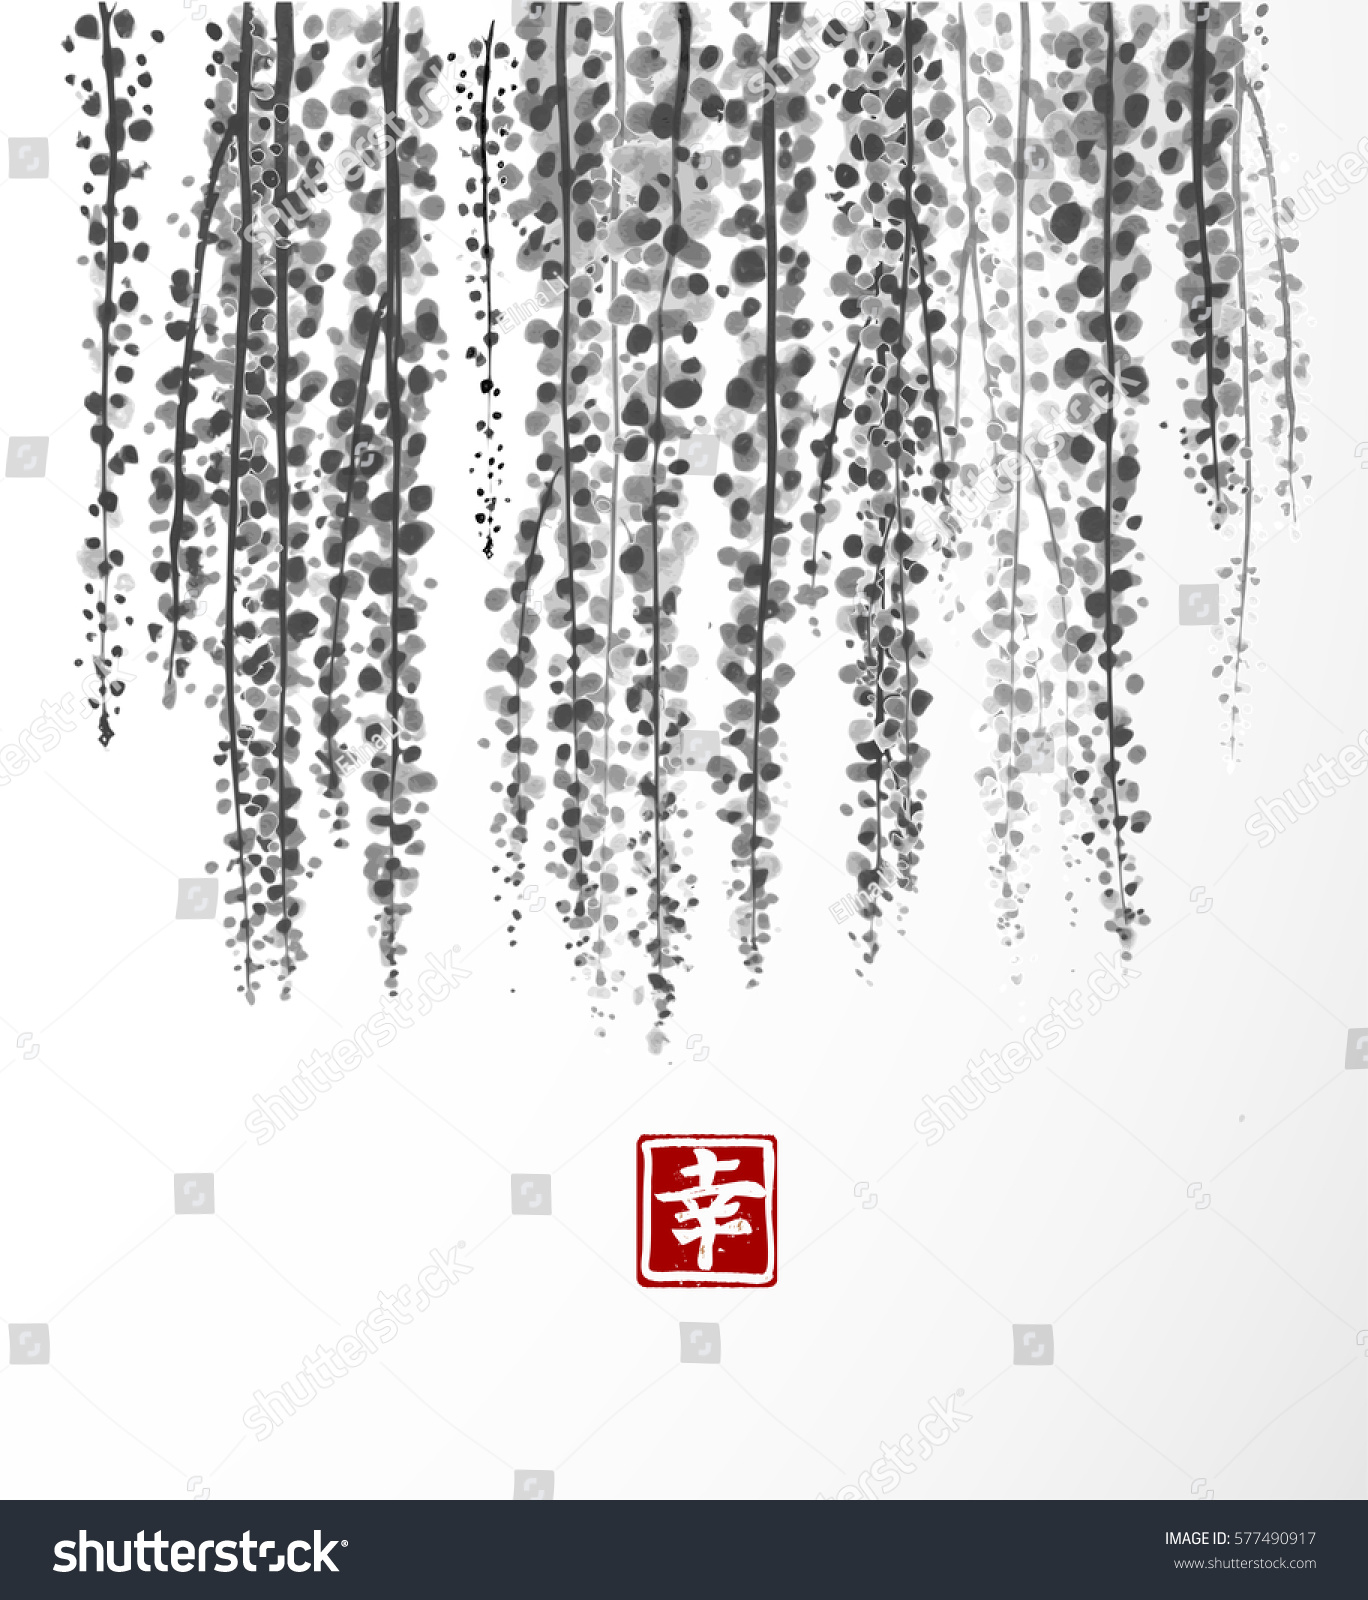 SVG of Wisteria hand drawn with ink on white background. Contains hieroglyph - happiness. Traditional oriental ink painting sumi-e, u-sin, go-hua. Bunches of flowers. svg